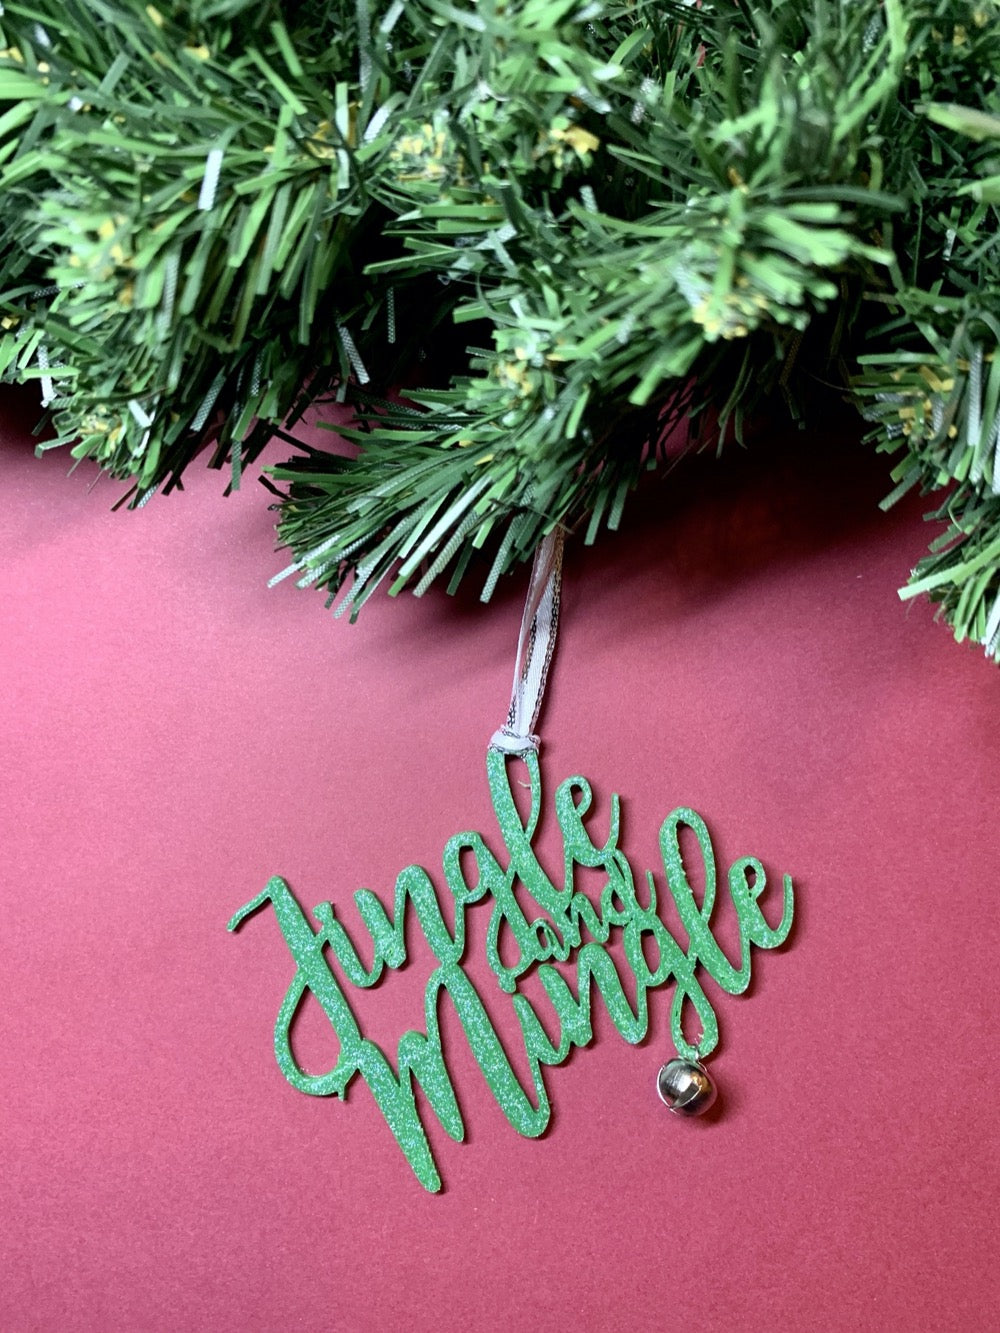 On a bright red background and hanging from a green wreath is a 3D printed R+D ornament. It is a cursive text with a jingle bell and covered in glitter to make it shimmer and shine in the light. This ornament reads, Jingle and Mingle.